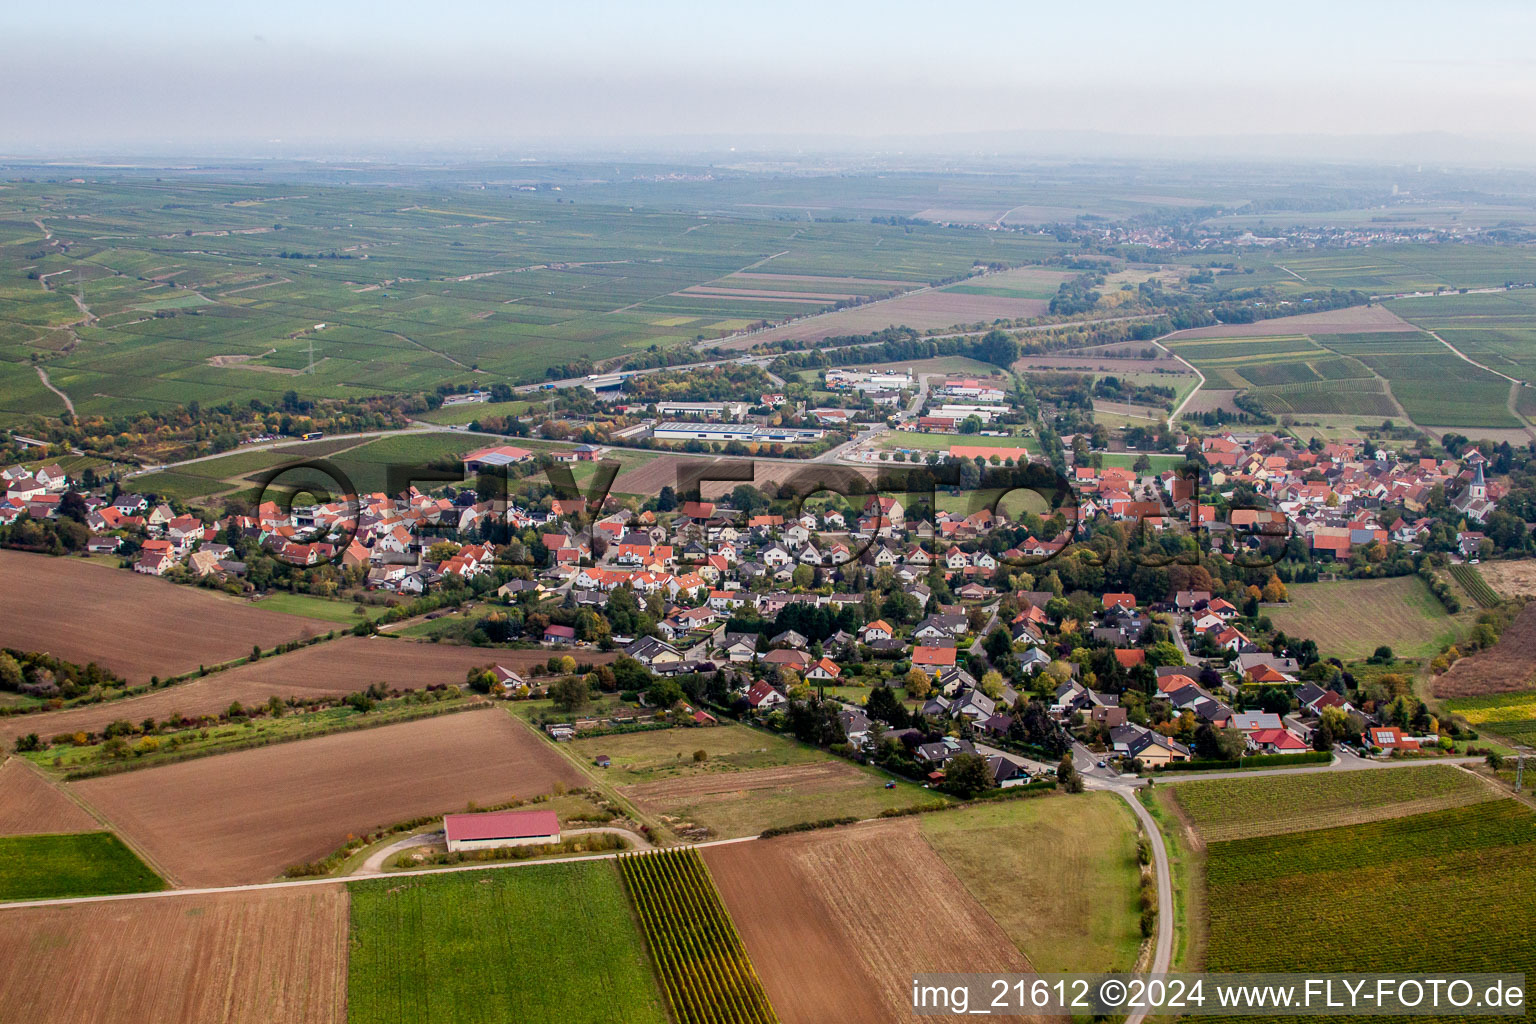 Village - view on the edge of agricultural fields and farmland in Gundersheim in the state Rhineland-Palatinate, Germany